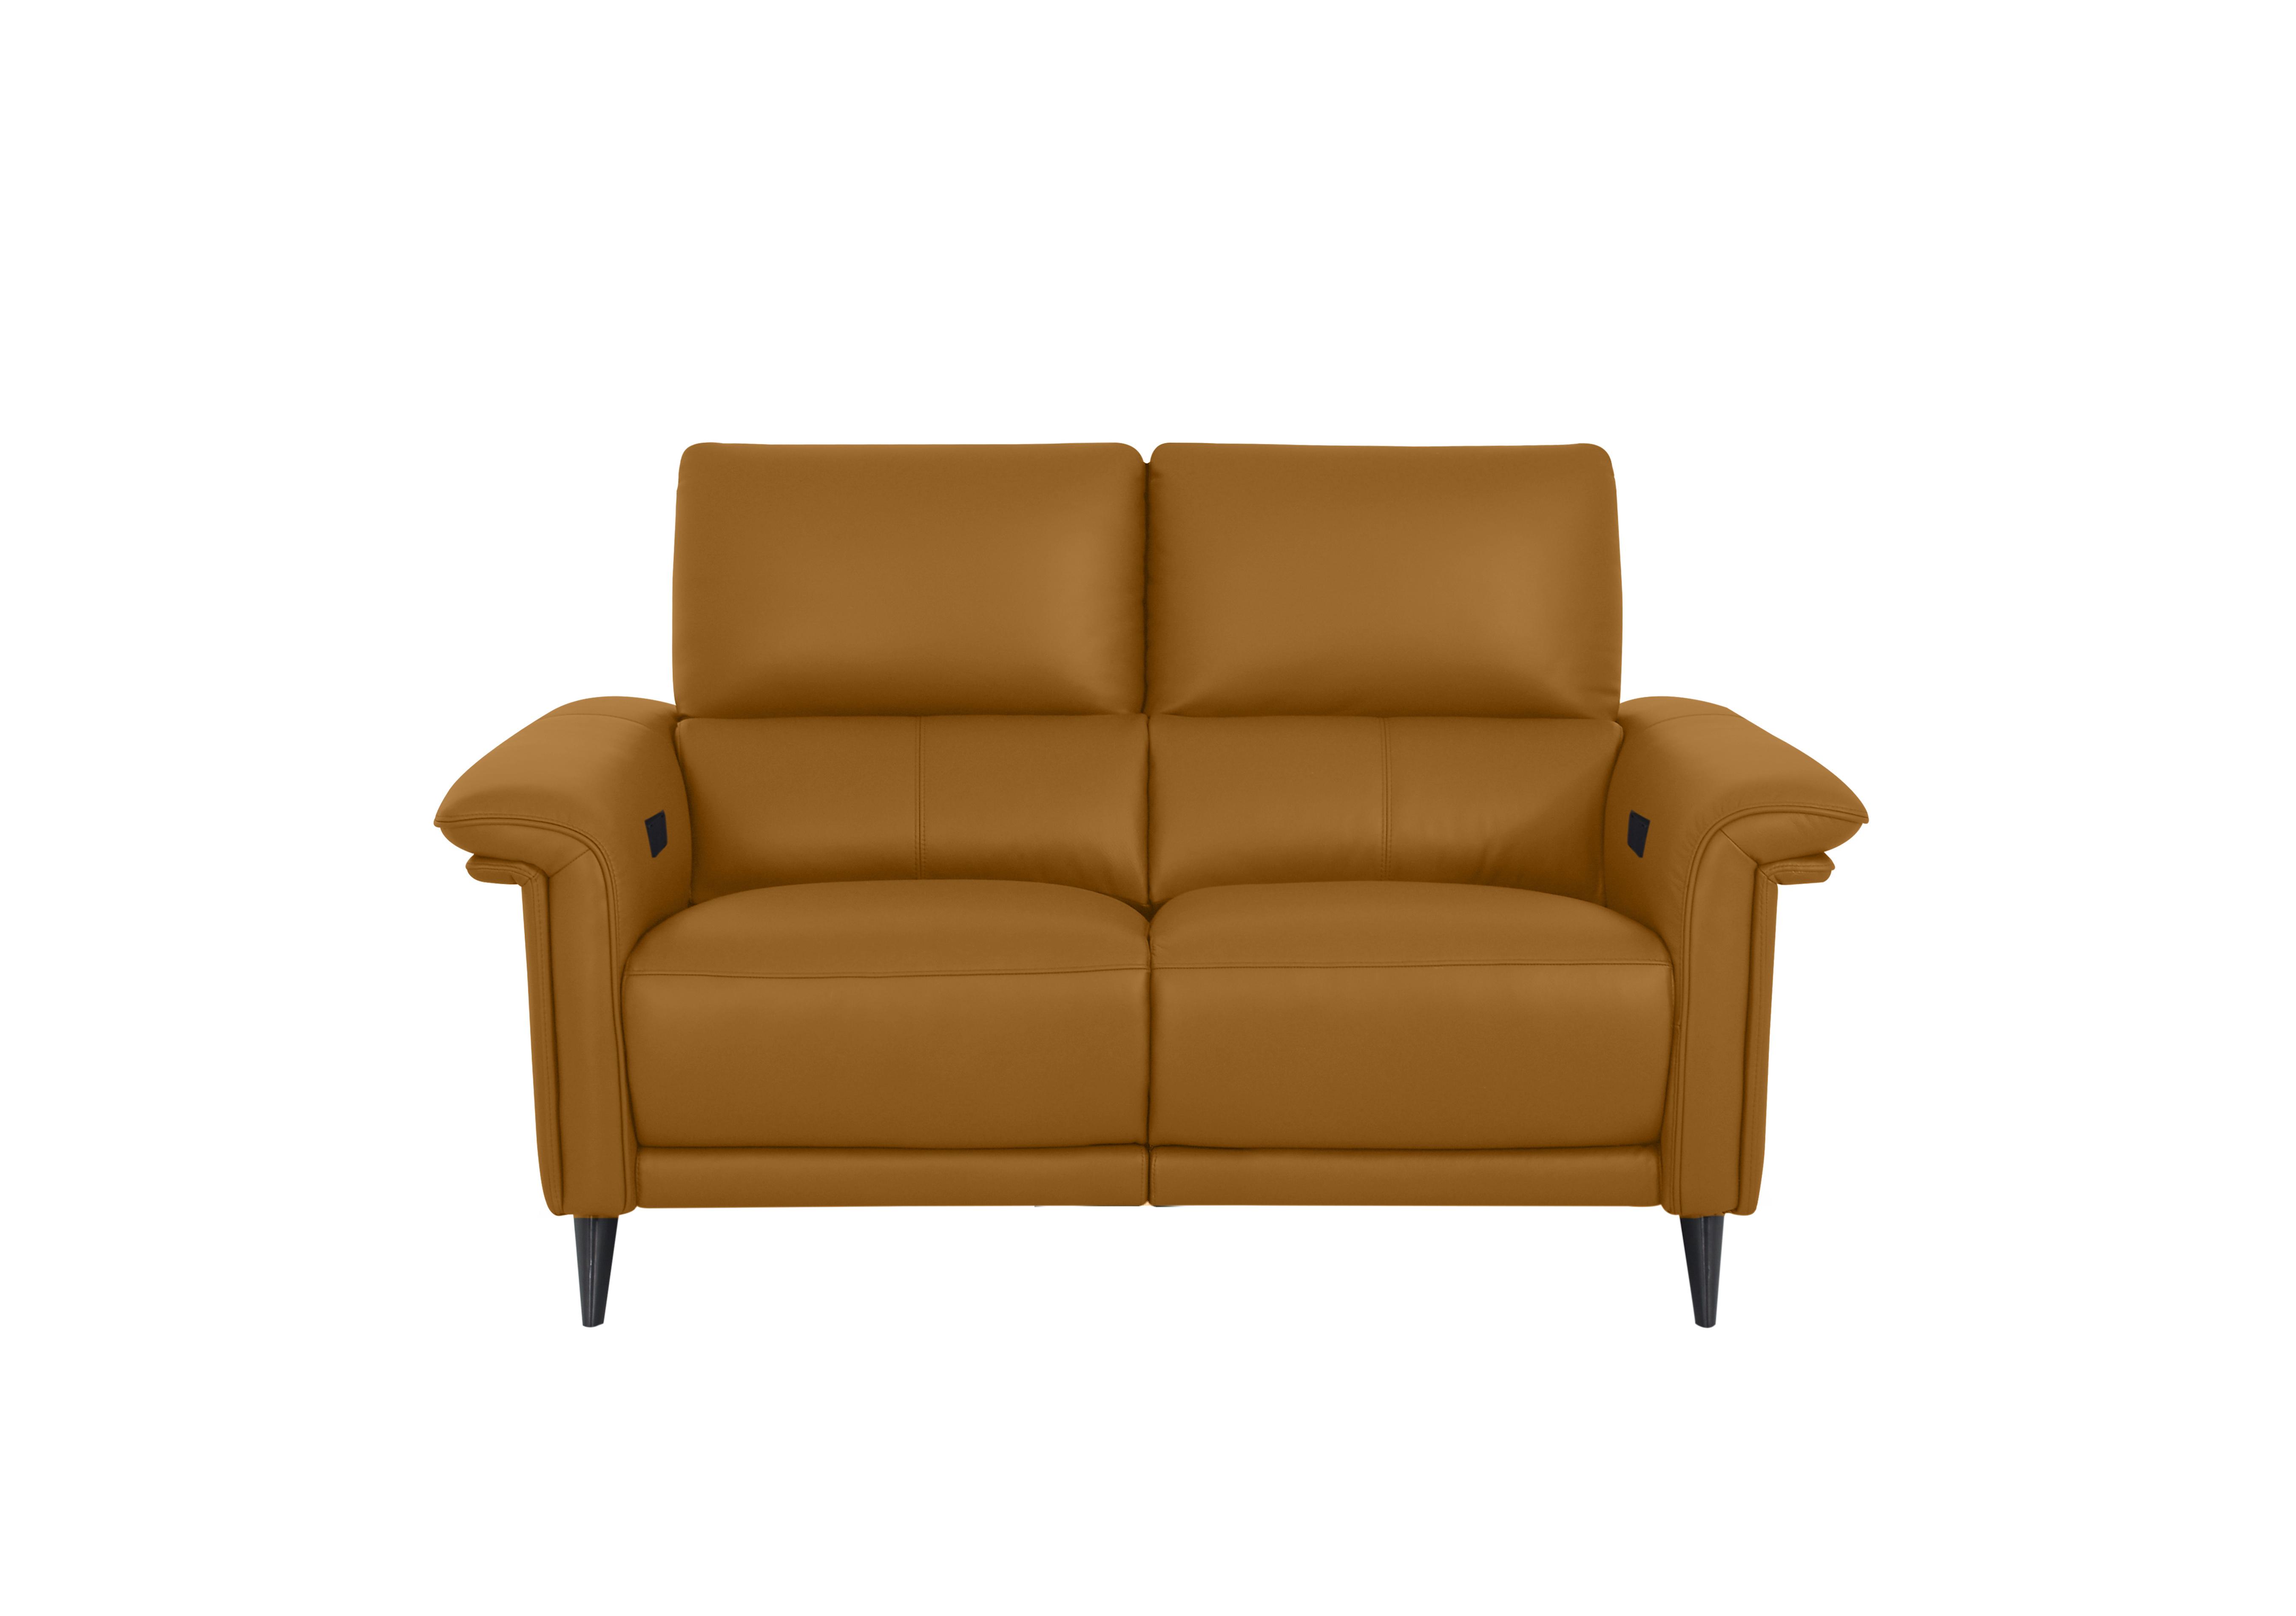 Huxley 2 Seater Leather Sofa in Np-606e Honey Yellow on Furniture Village